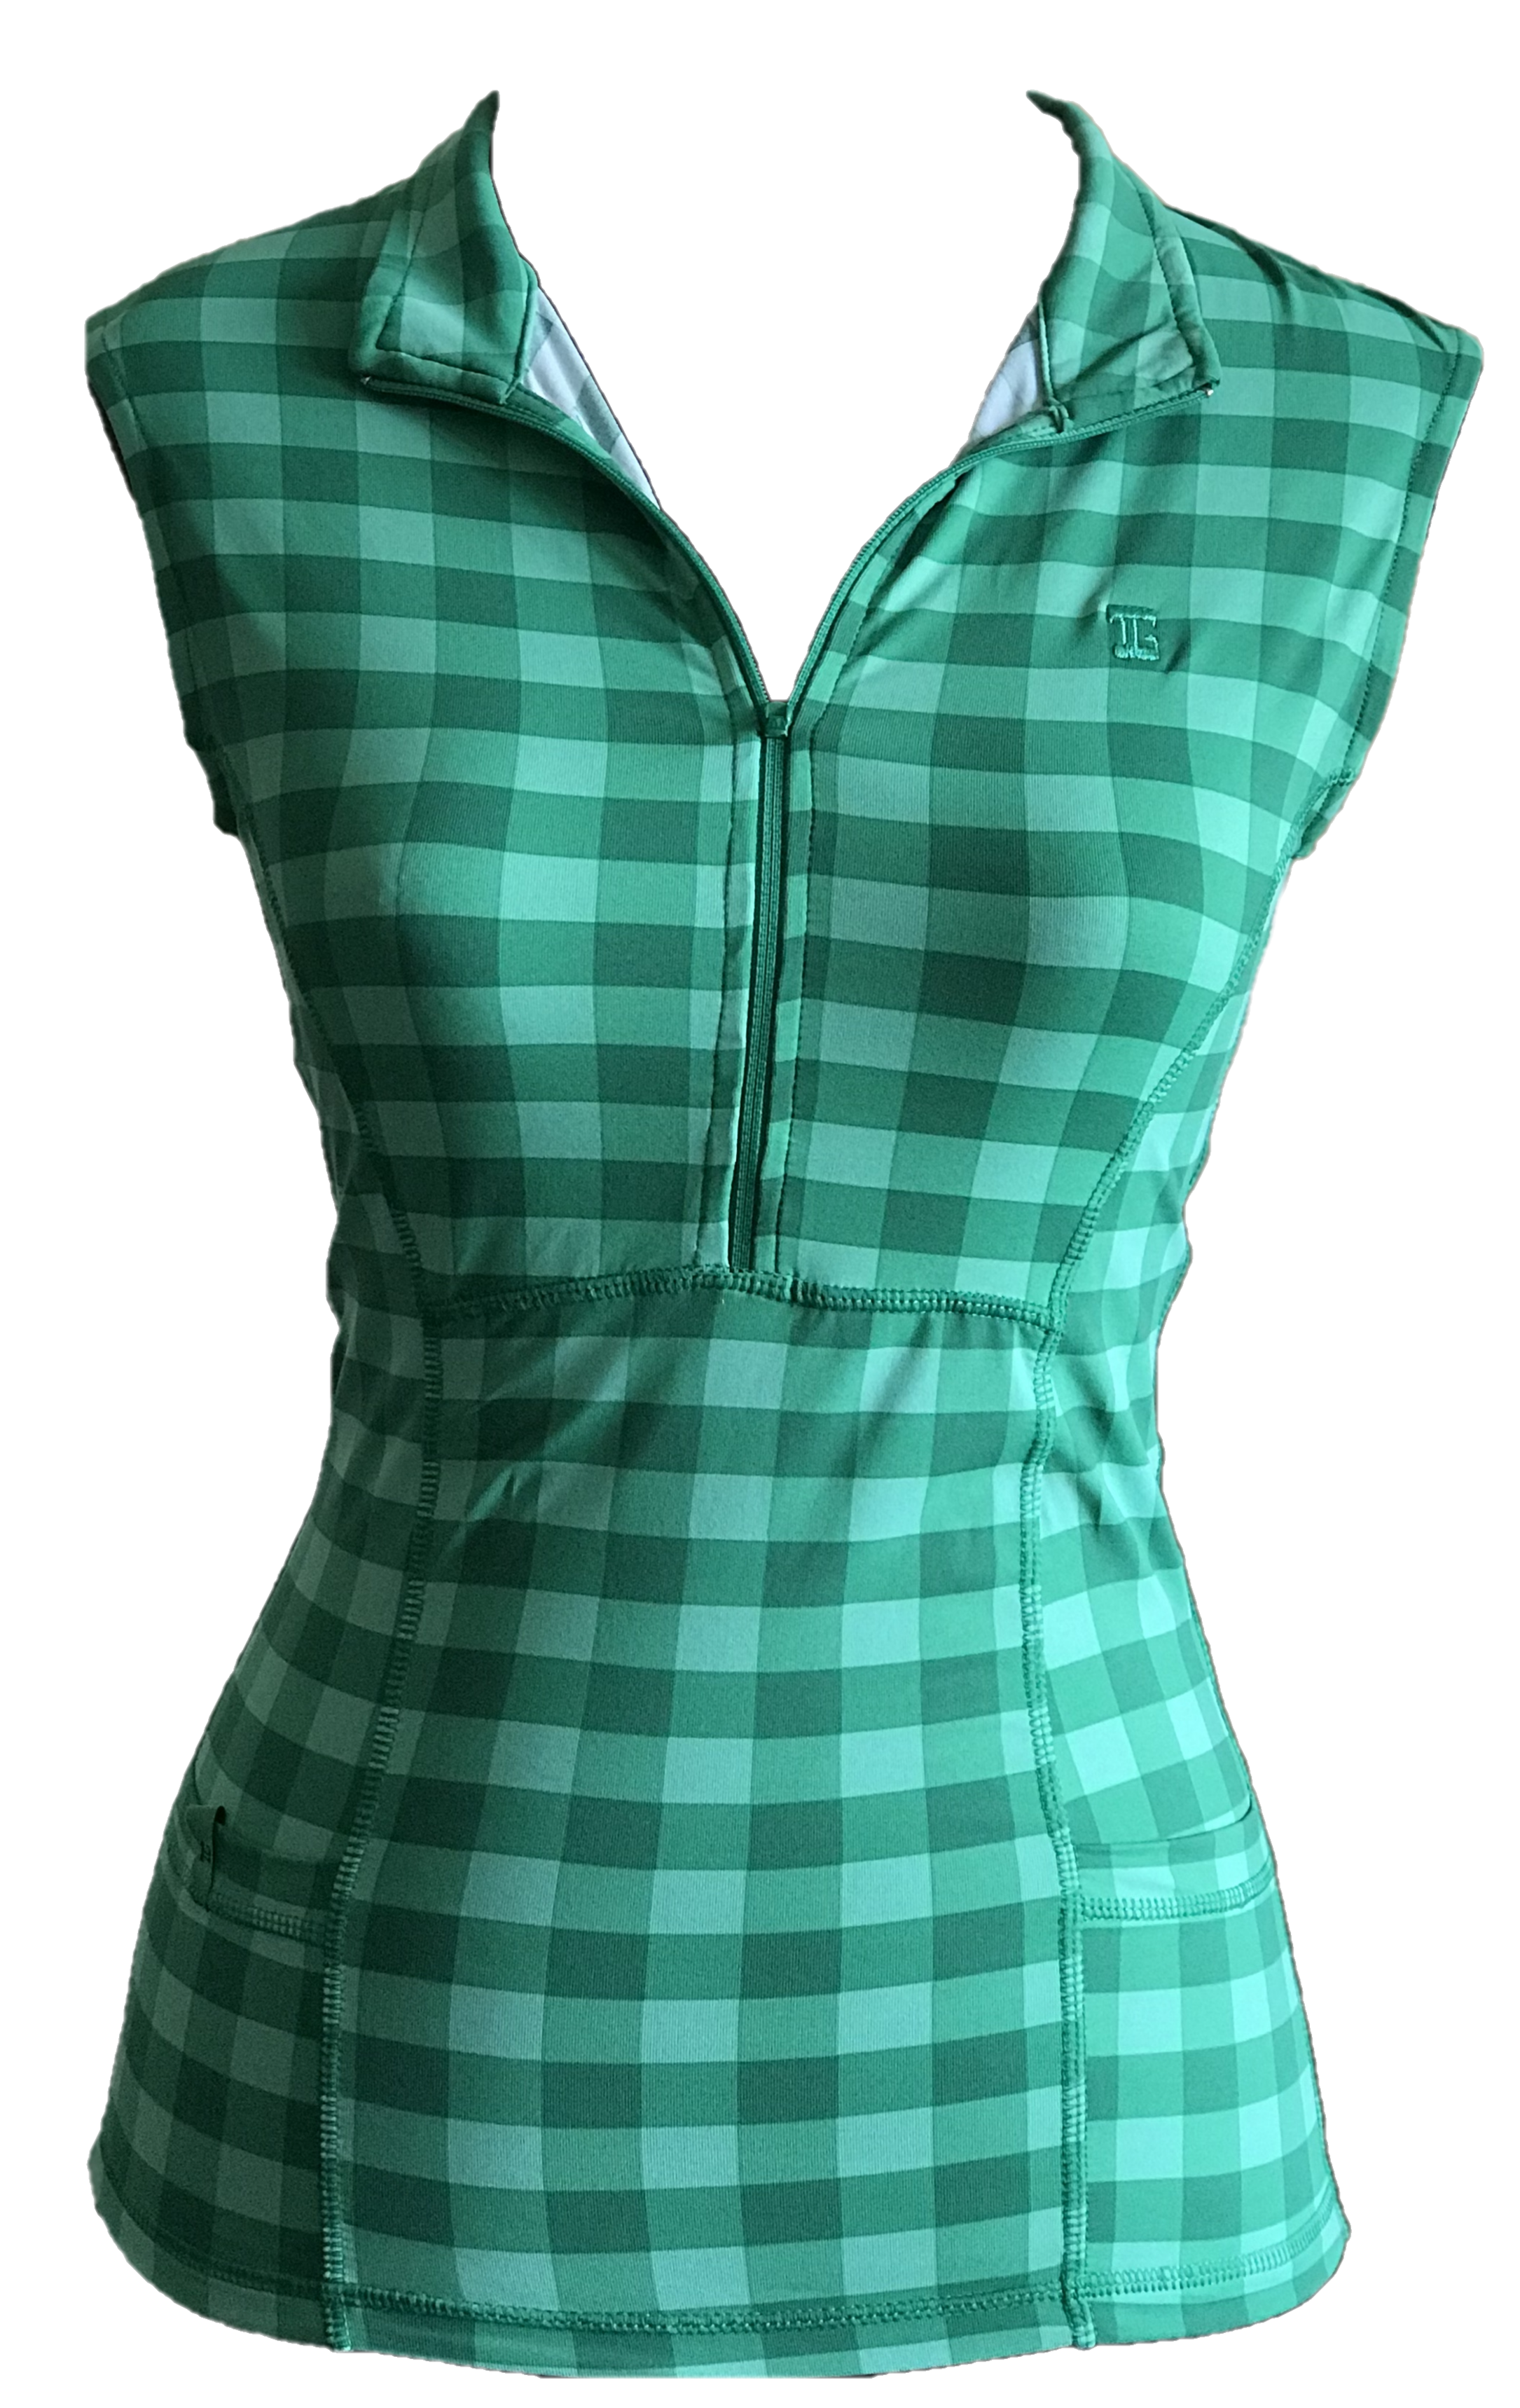 LT-086A || Ladies Top White/Green Square Pattern with Zipper Sleeveless